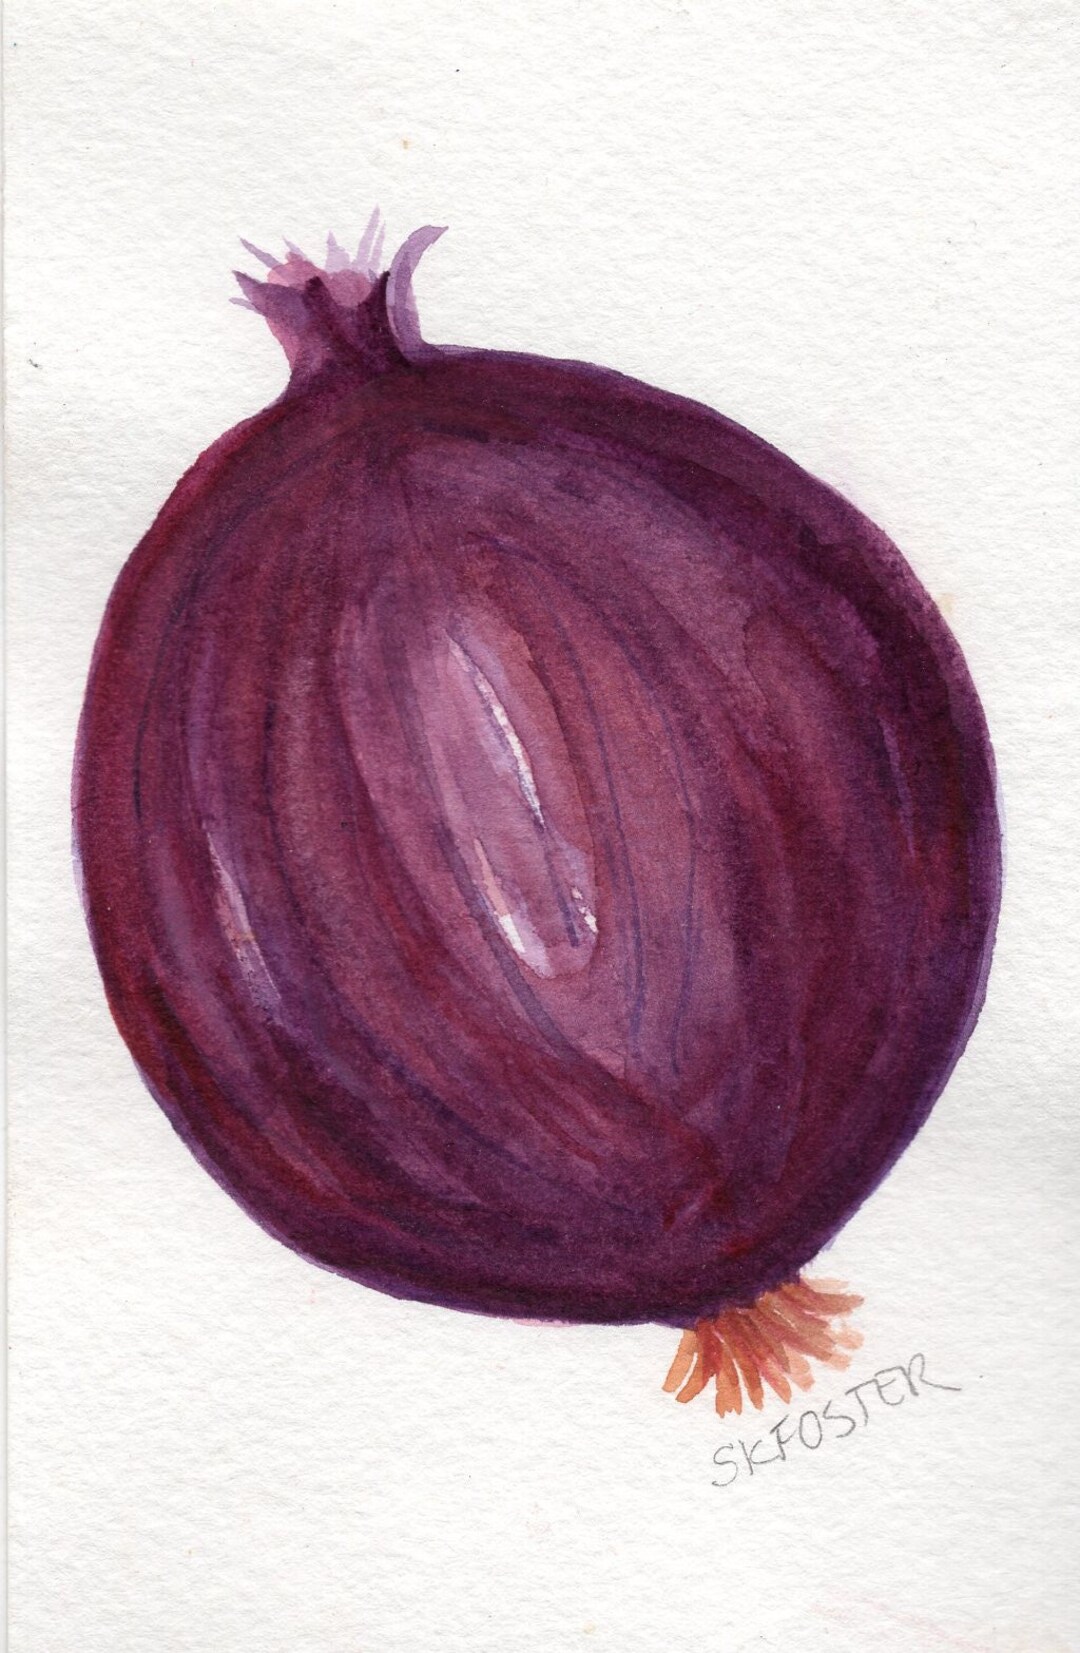 Onion Drawing - Colorful Vegetable Art